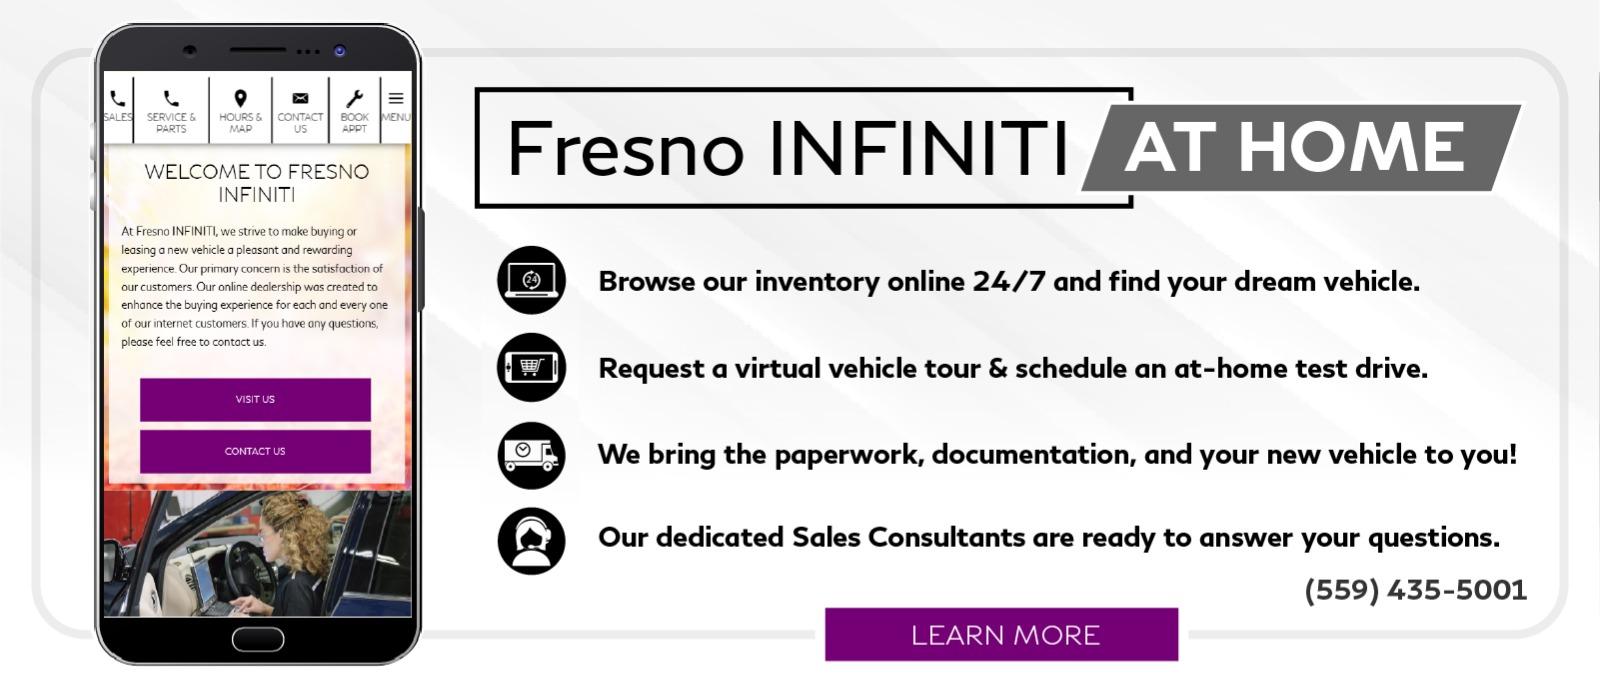 Fresno INFINITI At Home - 100% Online Car Shopping. Click to learn more.